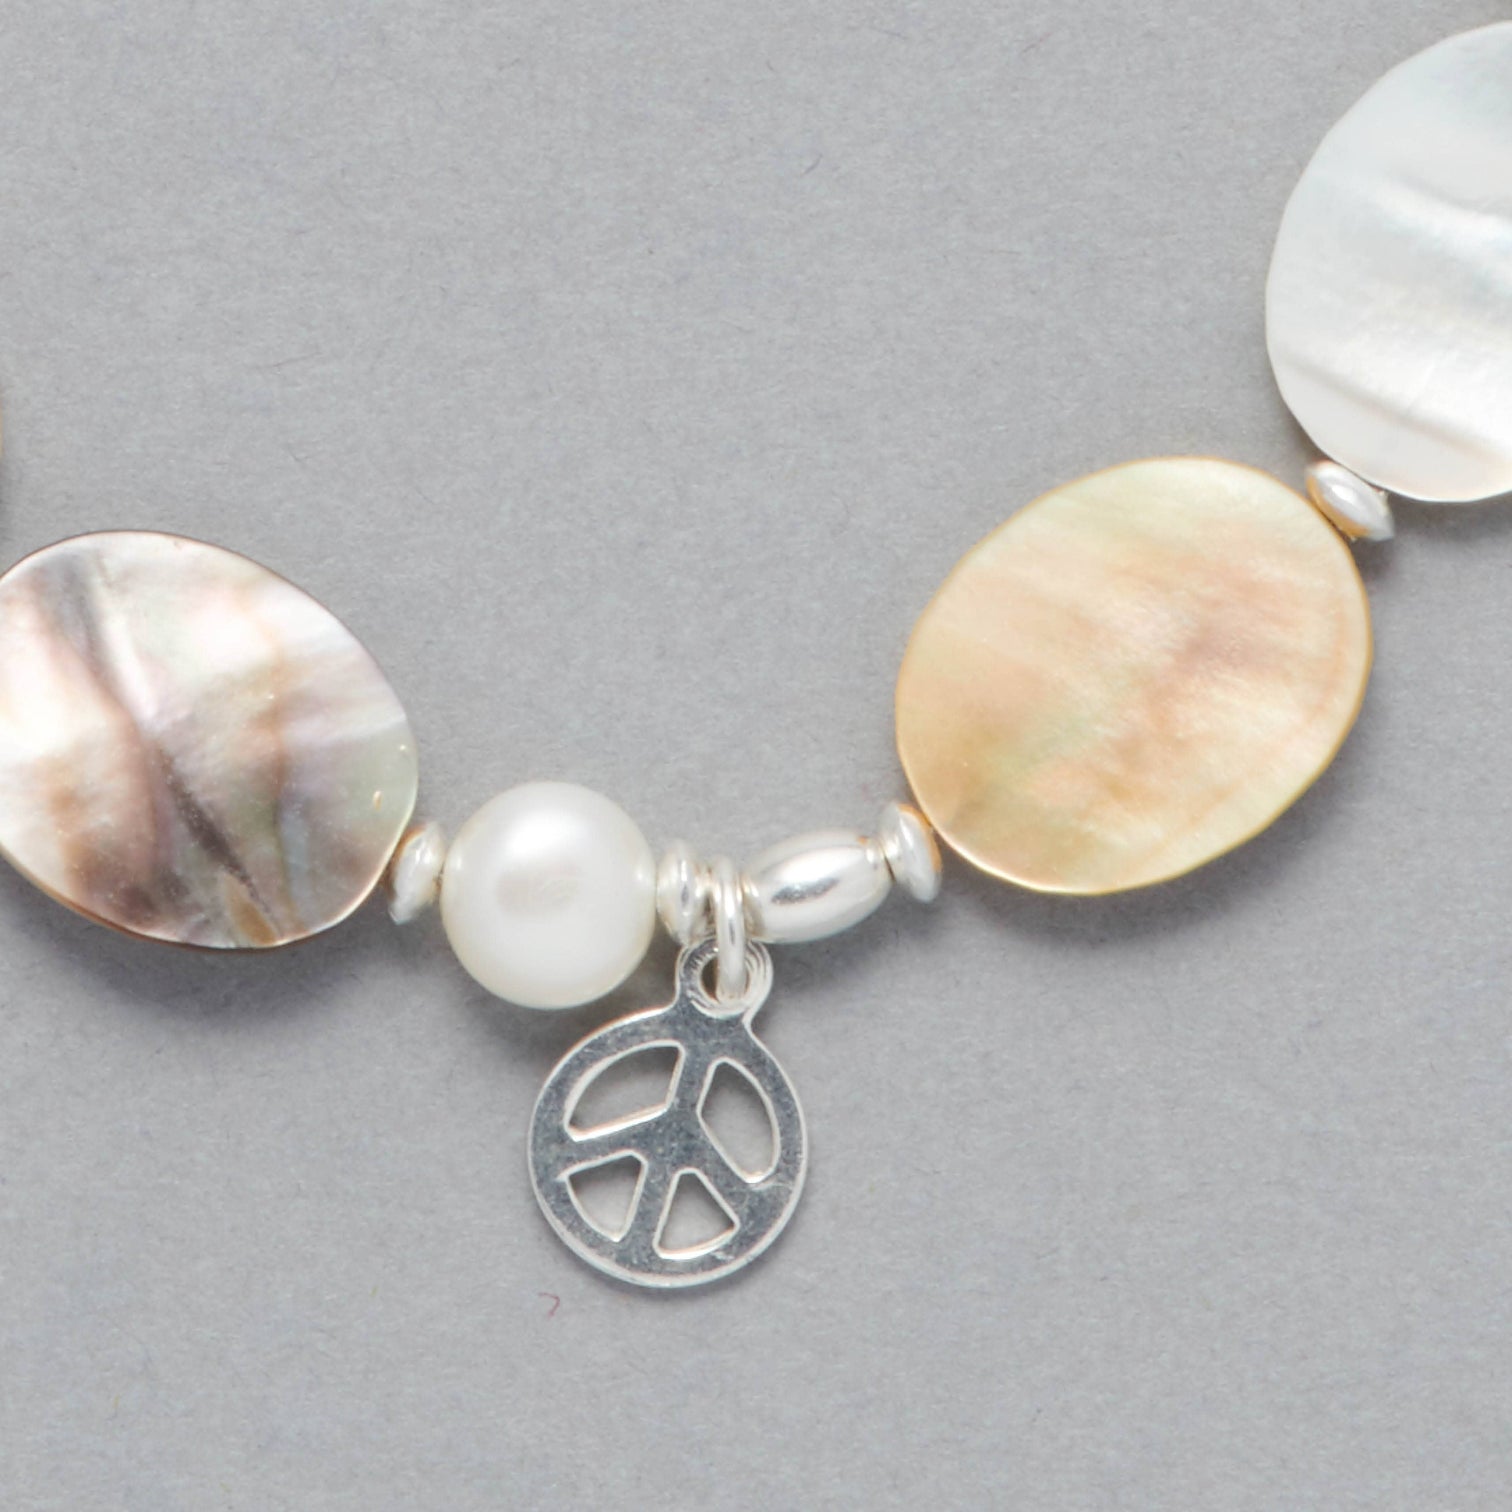 Detail shot of the Marilla Anklet made with Mother of Pearl, Freshwater White Pearls, Sterling Silver elements and a Sterling Silver Peace Symbol Charm. 